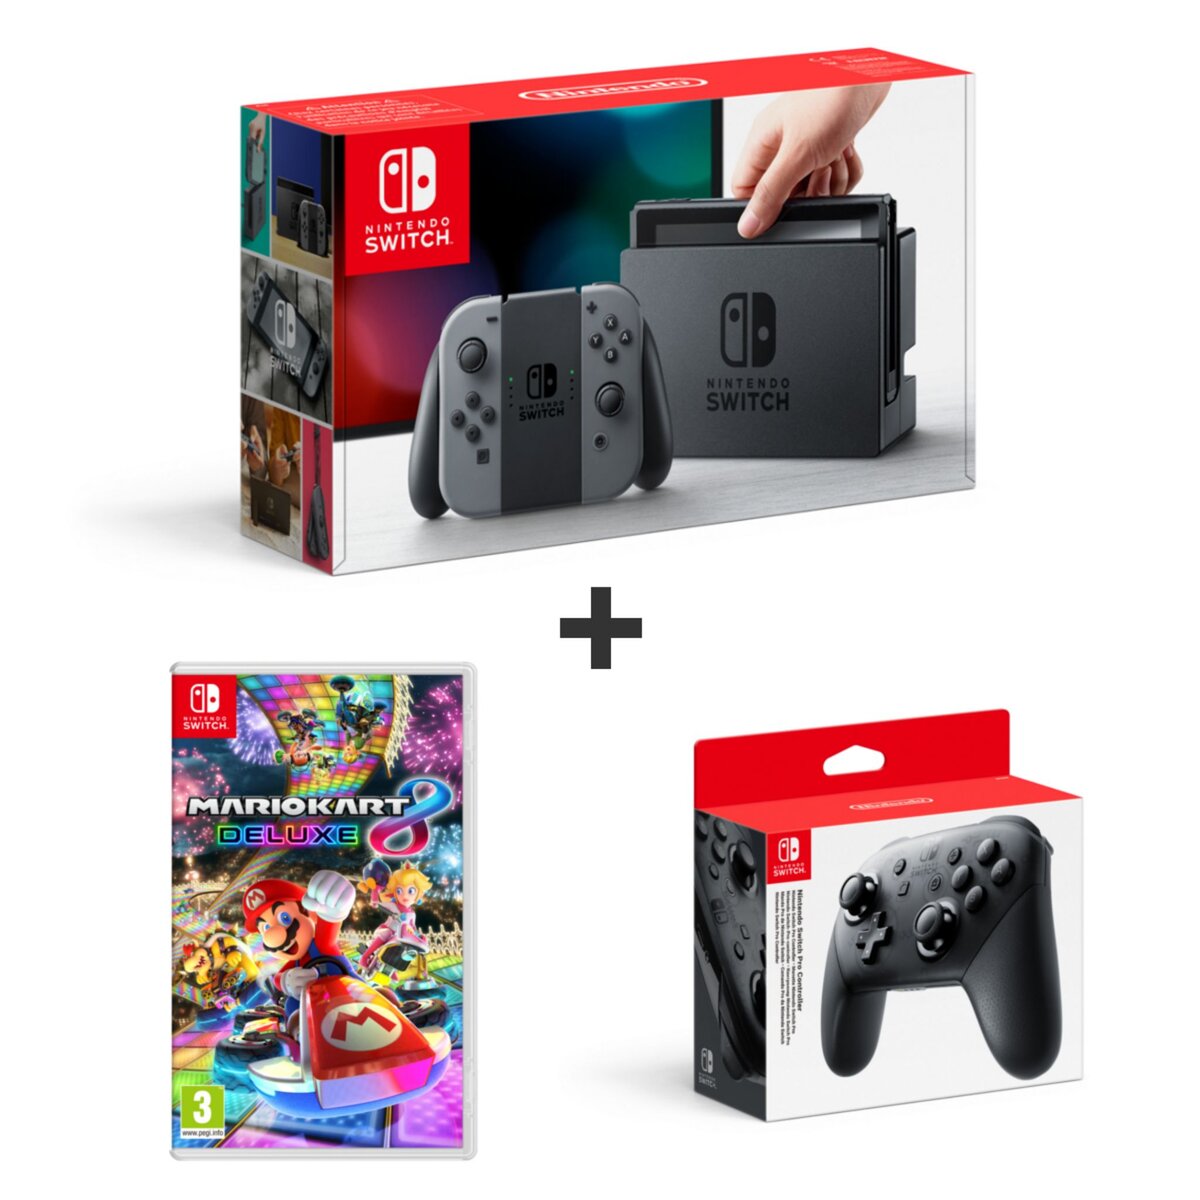 EXCLU WEB Console Nintendo Switch Grise + Mario Kart 8 Deluxe + Manette Switch PRO